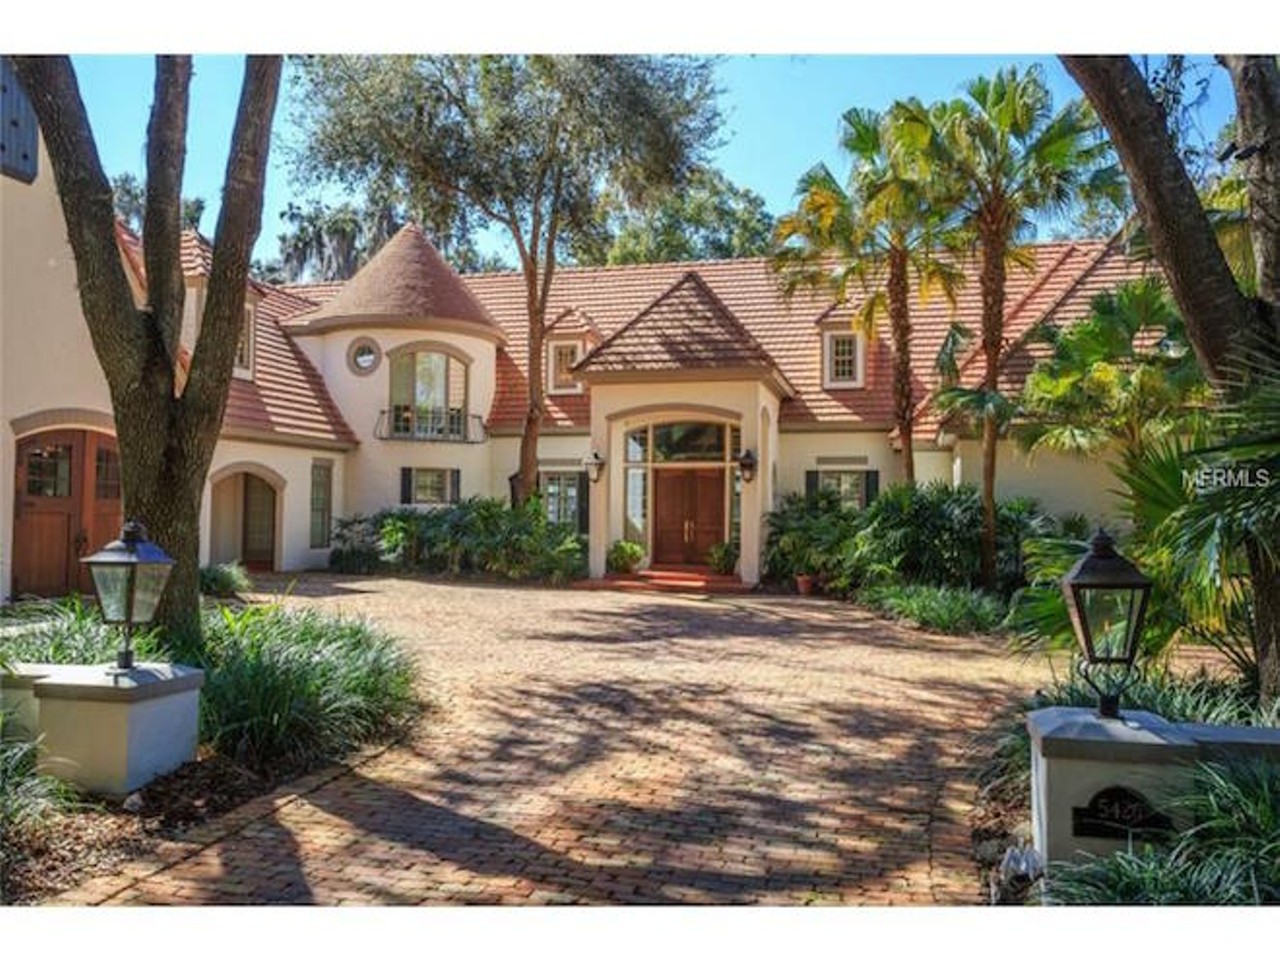 5426 Osprey Lane: This palatial estate has 4 bedrooms, and it's listed at $3,499,000.